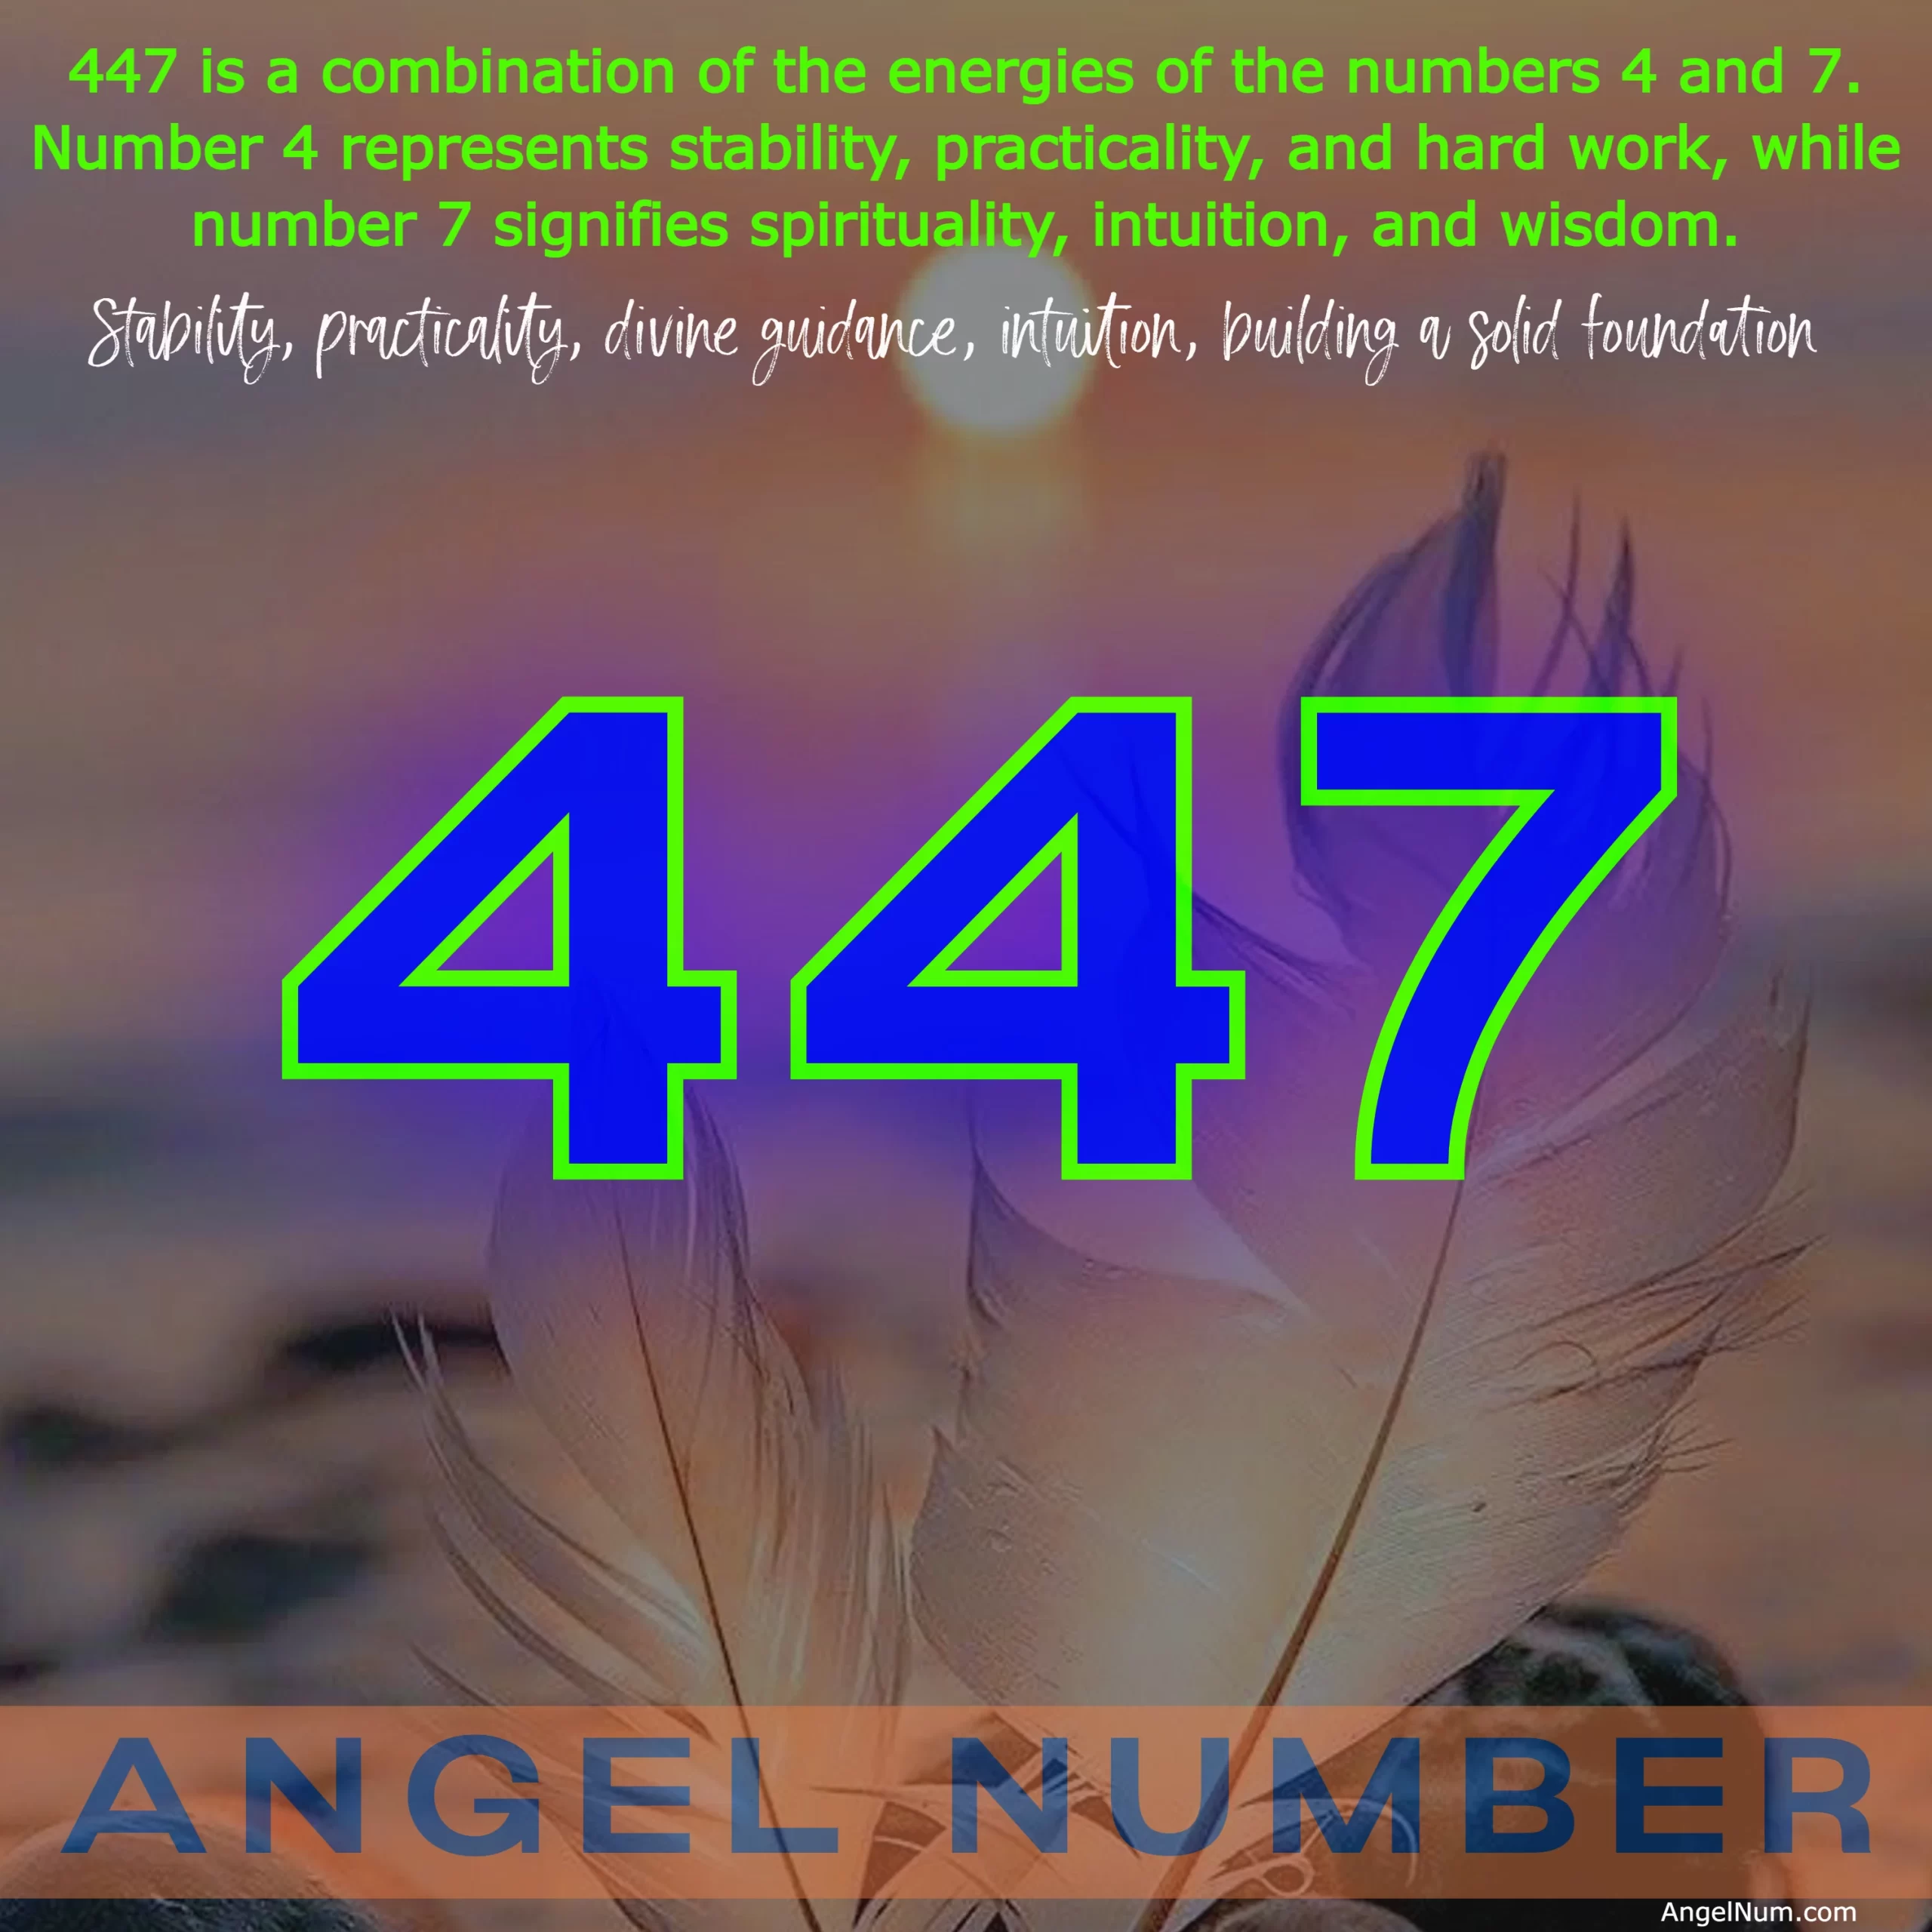 Unlocking the Mysteries of Angel Number 447: Meaning, Numerology, Tarot, and More